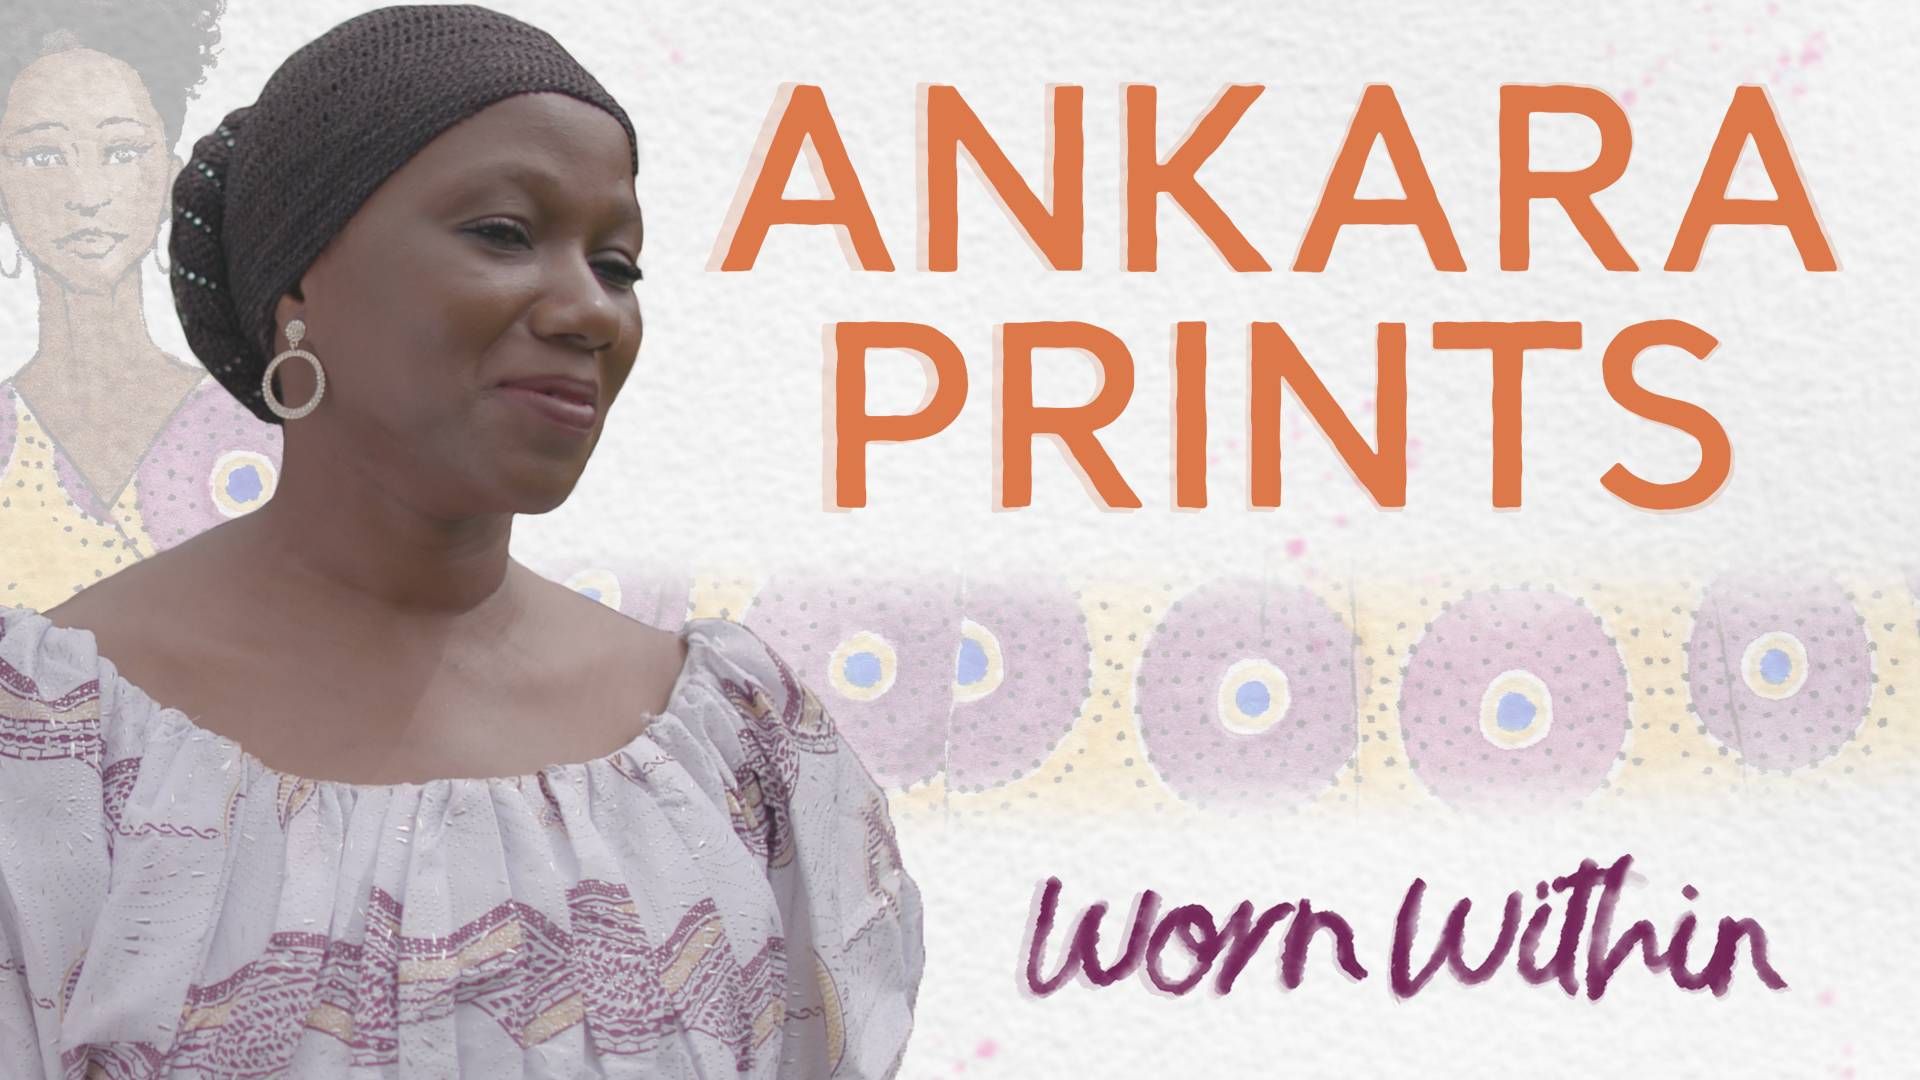 Worn Within: What is the origin of West African Ankara prints?